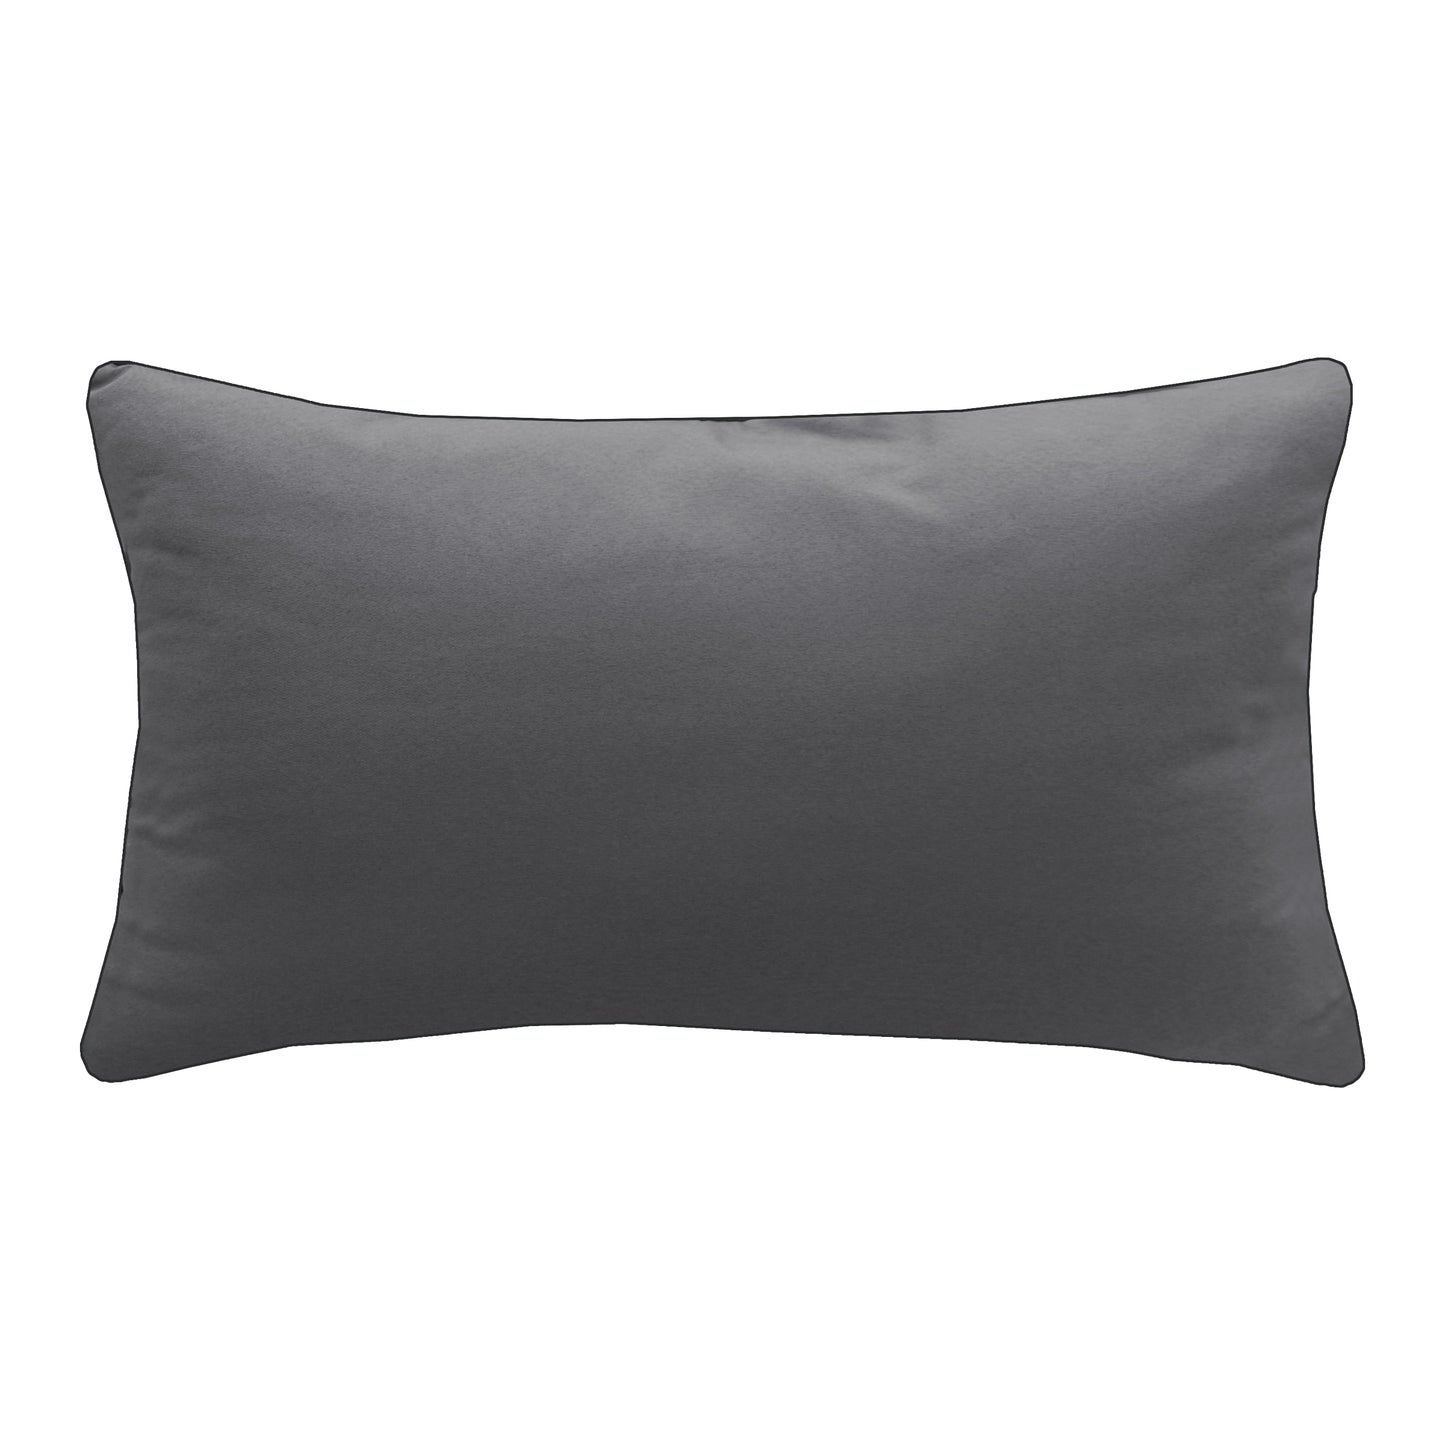 Solid gray fabric; back side of the Equine Frolic Lumbar pillow.